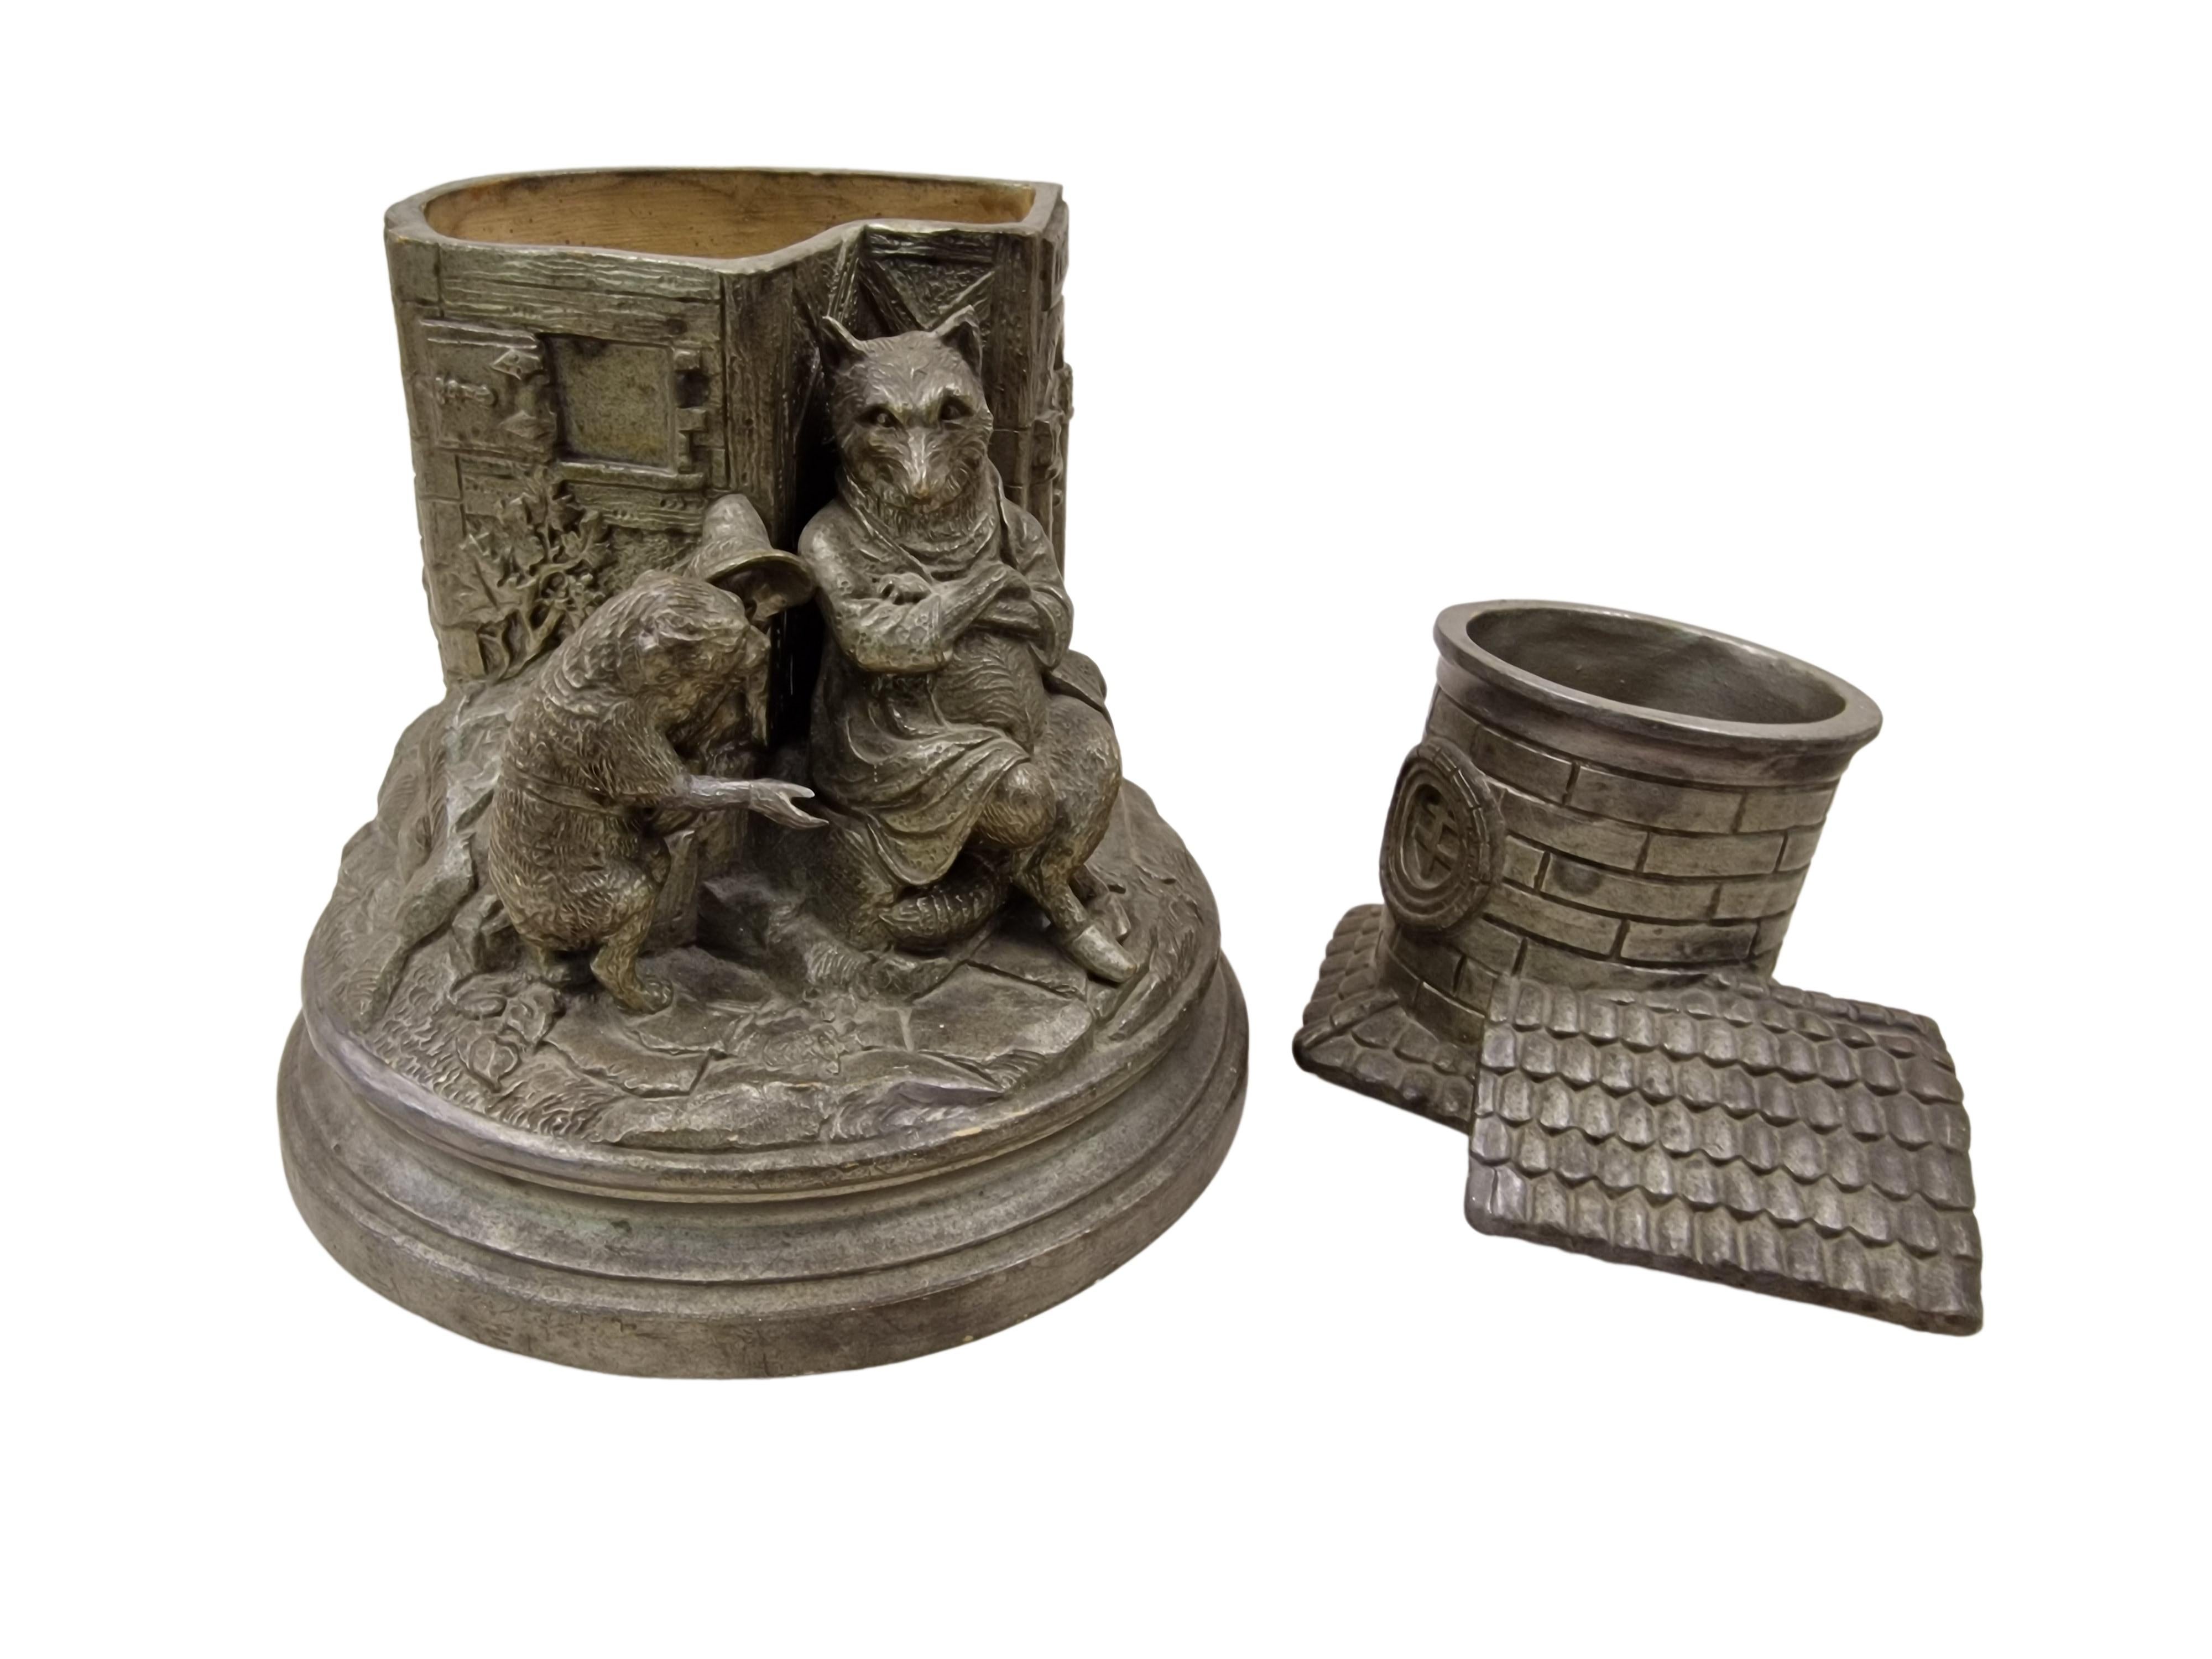 Extremly rare, extraordinary collector's item of exceptional size. This storage for snuff looks like metal, but is made of masterfully crafted ceramic. 
This object from the historism period around 1890, was made in Central Europe, due to the